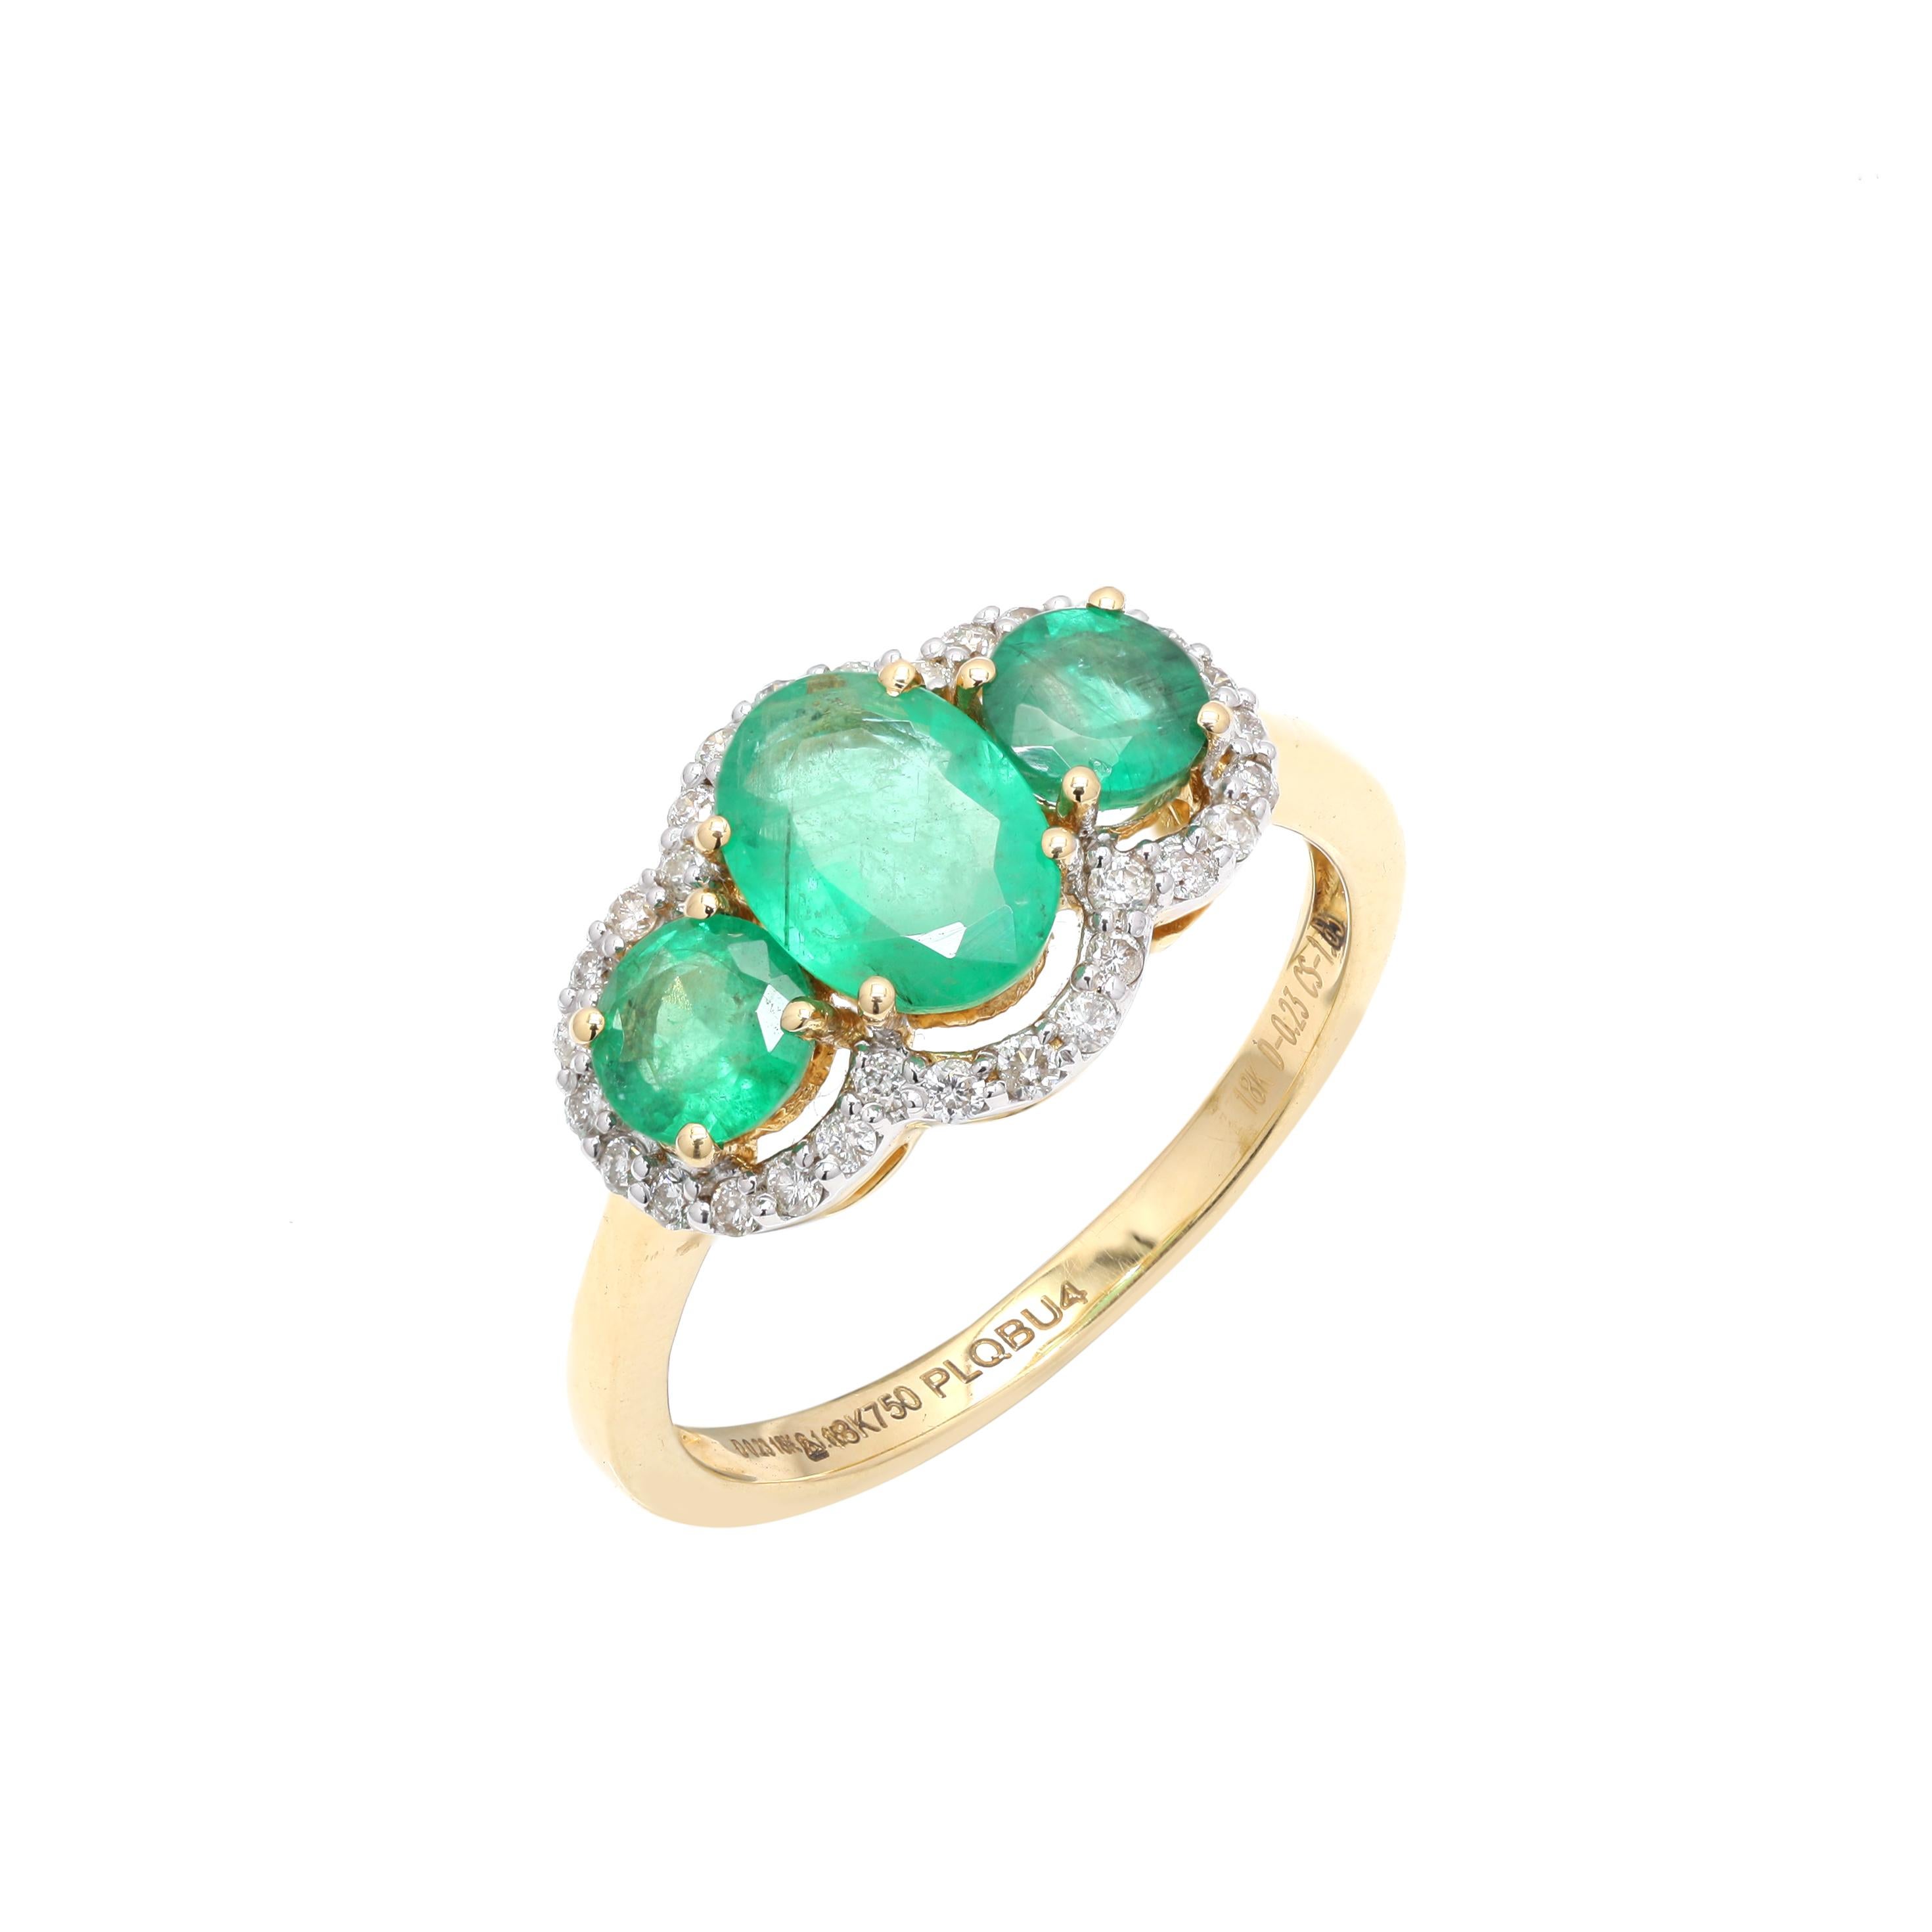 For Sale:  Natural 18k Yellow Gold Emerald Ring, Three Stone Emerald and Diamond Ring 6